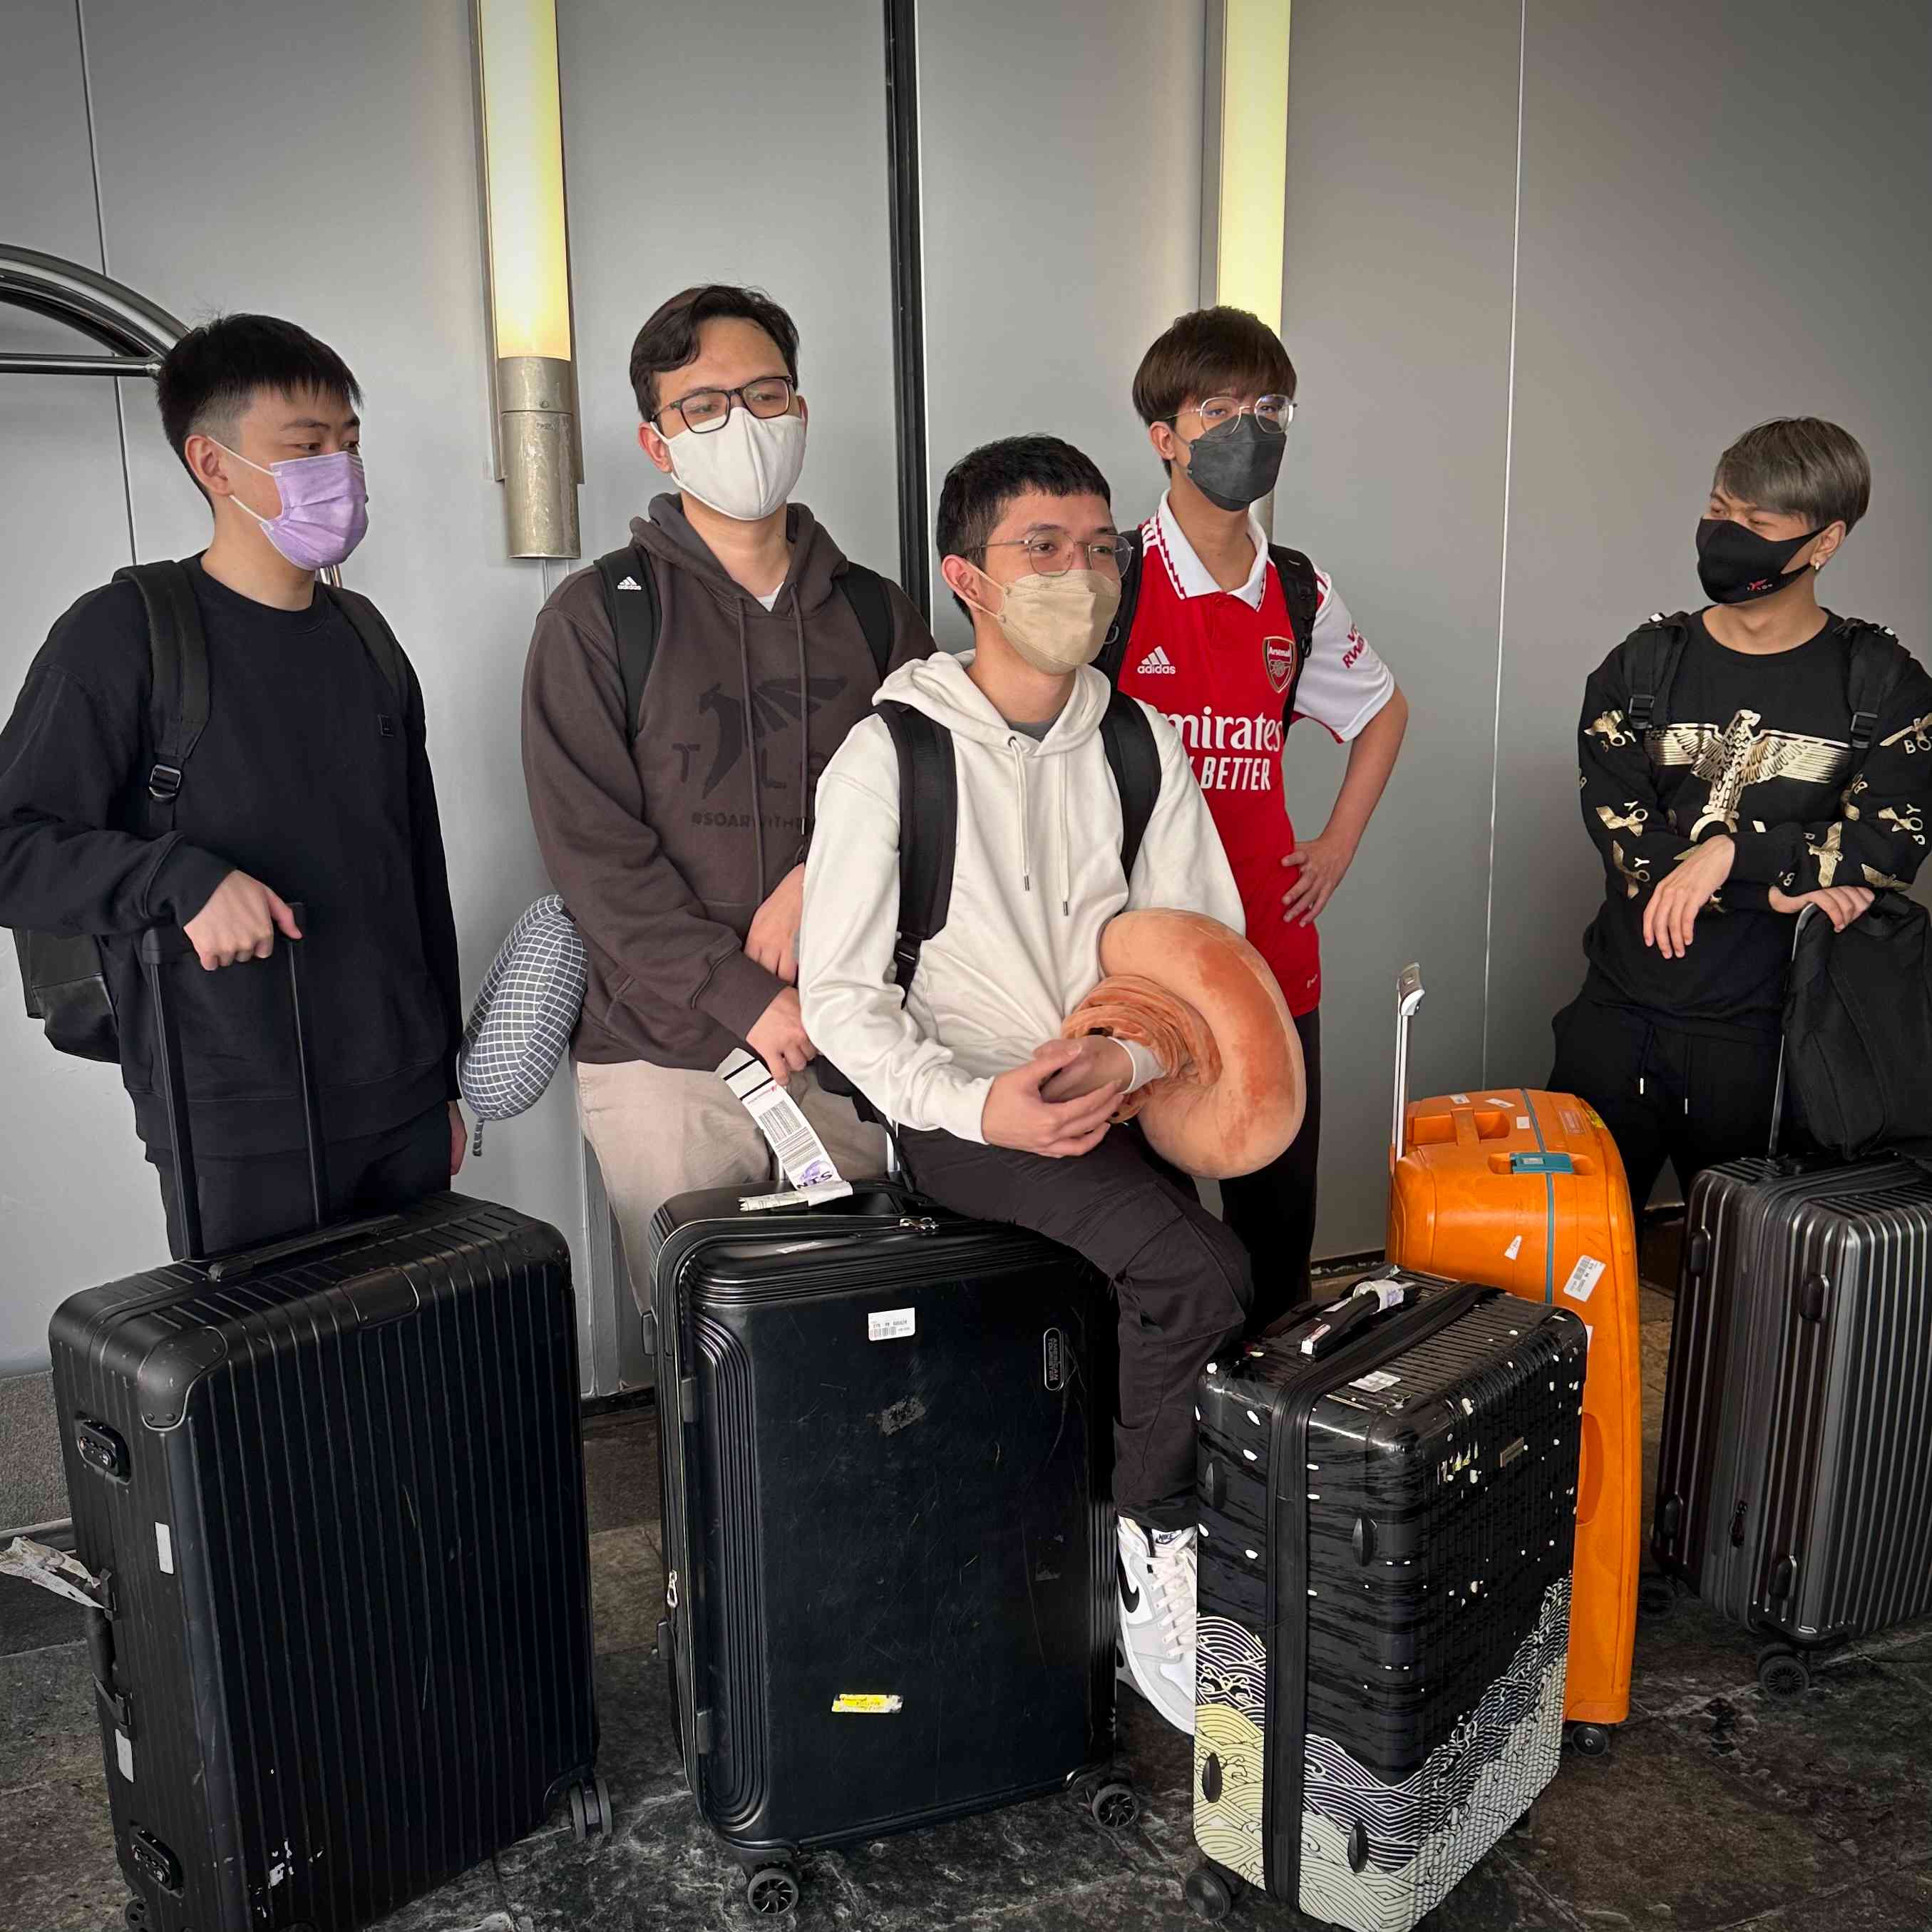 The roster for Talon Esports, with suitcases packed arrive at Singapore International airport for TI 11